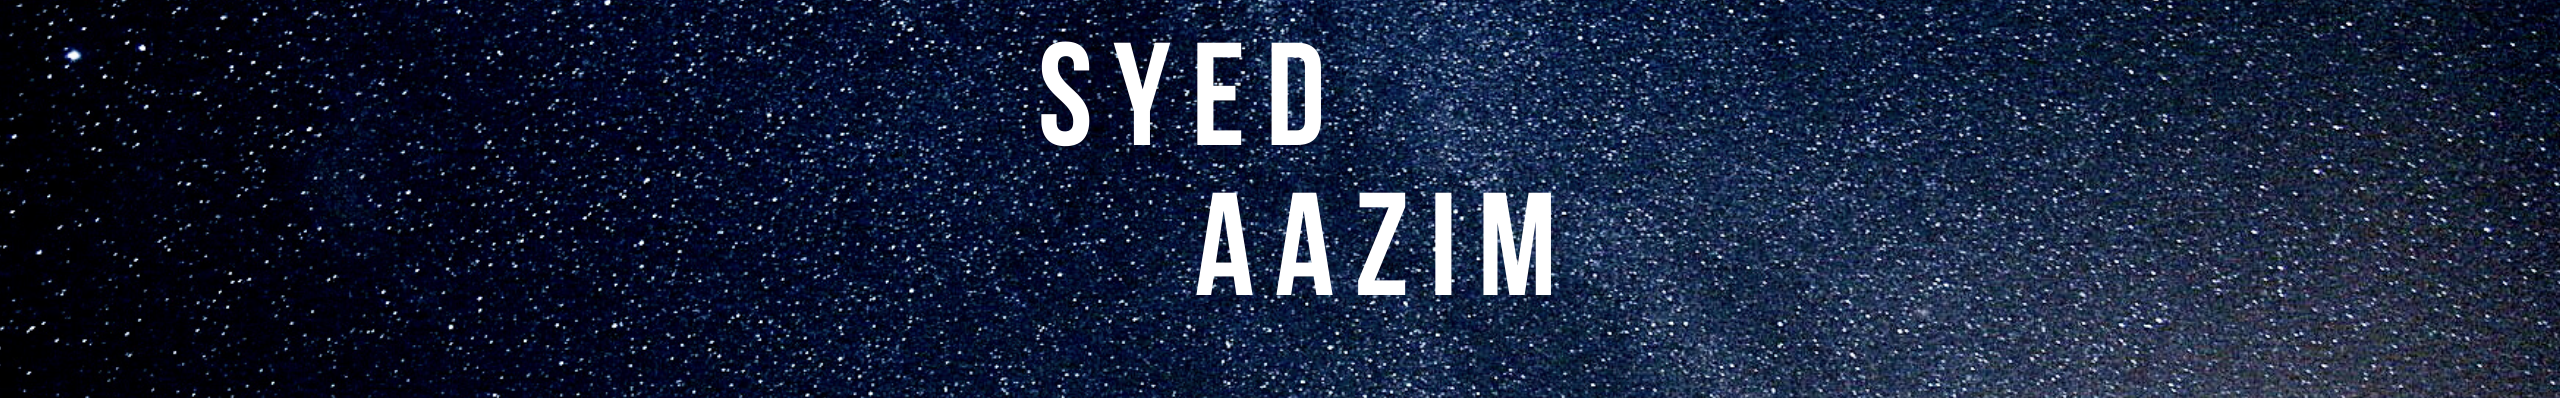 syed aazim's profile banner